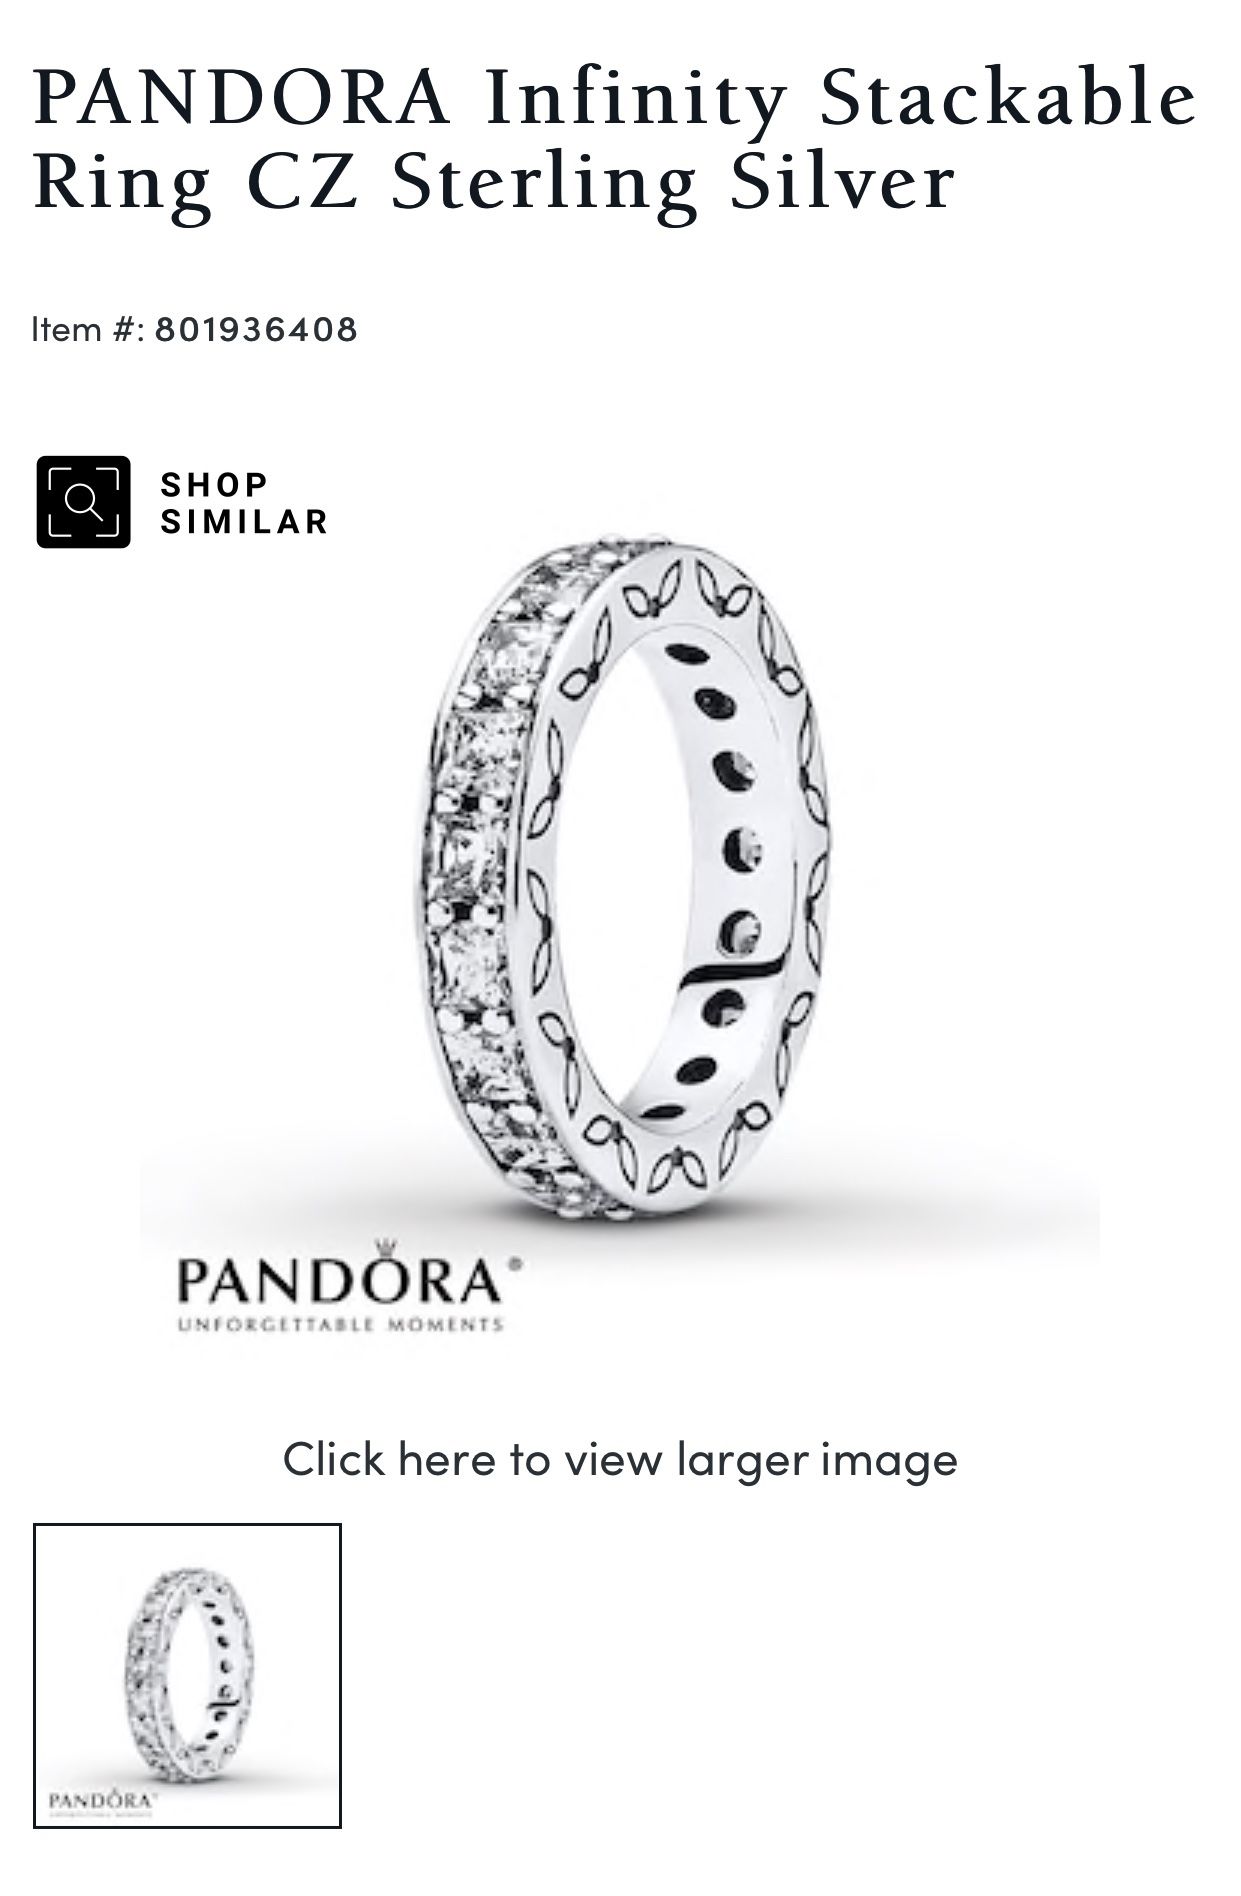 Pandora ring new in box with tag